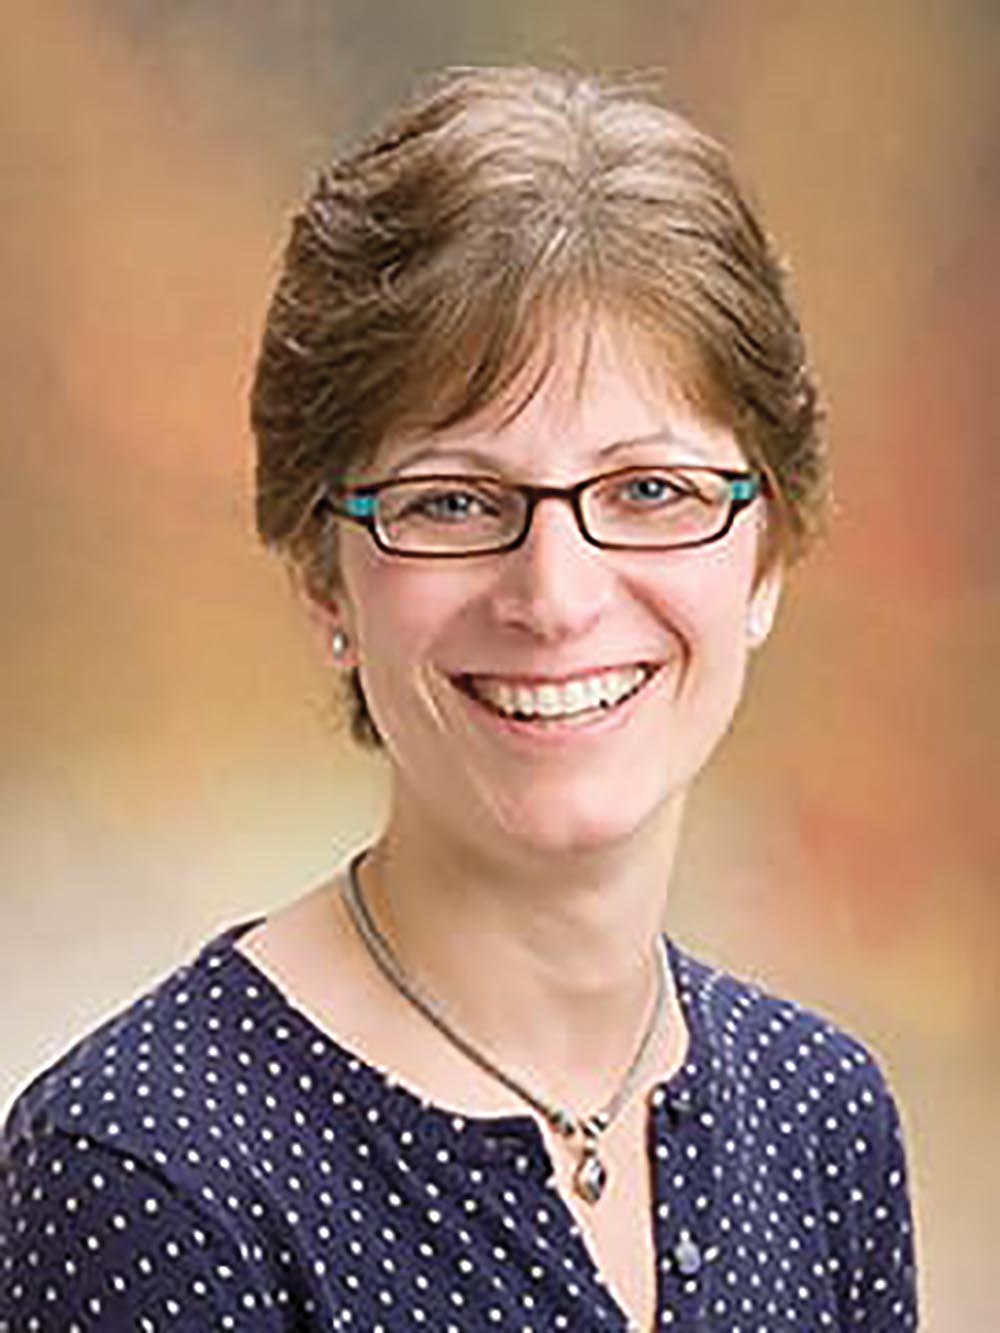 Wendy Hobbie, MSN, CRNP, FAAN, is the associate director of the Cancer Survivorship Program at the Children’s Hospital of Philadelphia in Pennsylvania